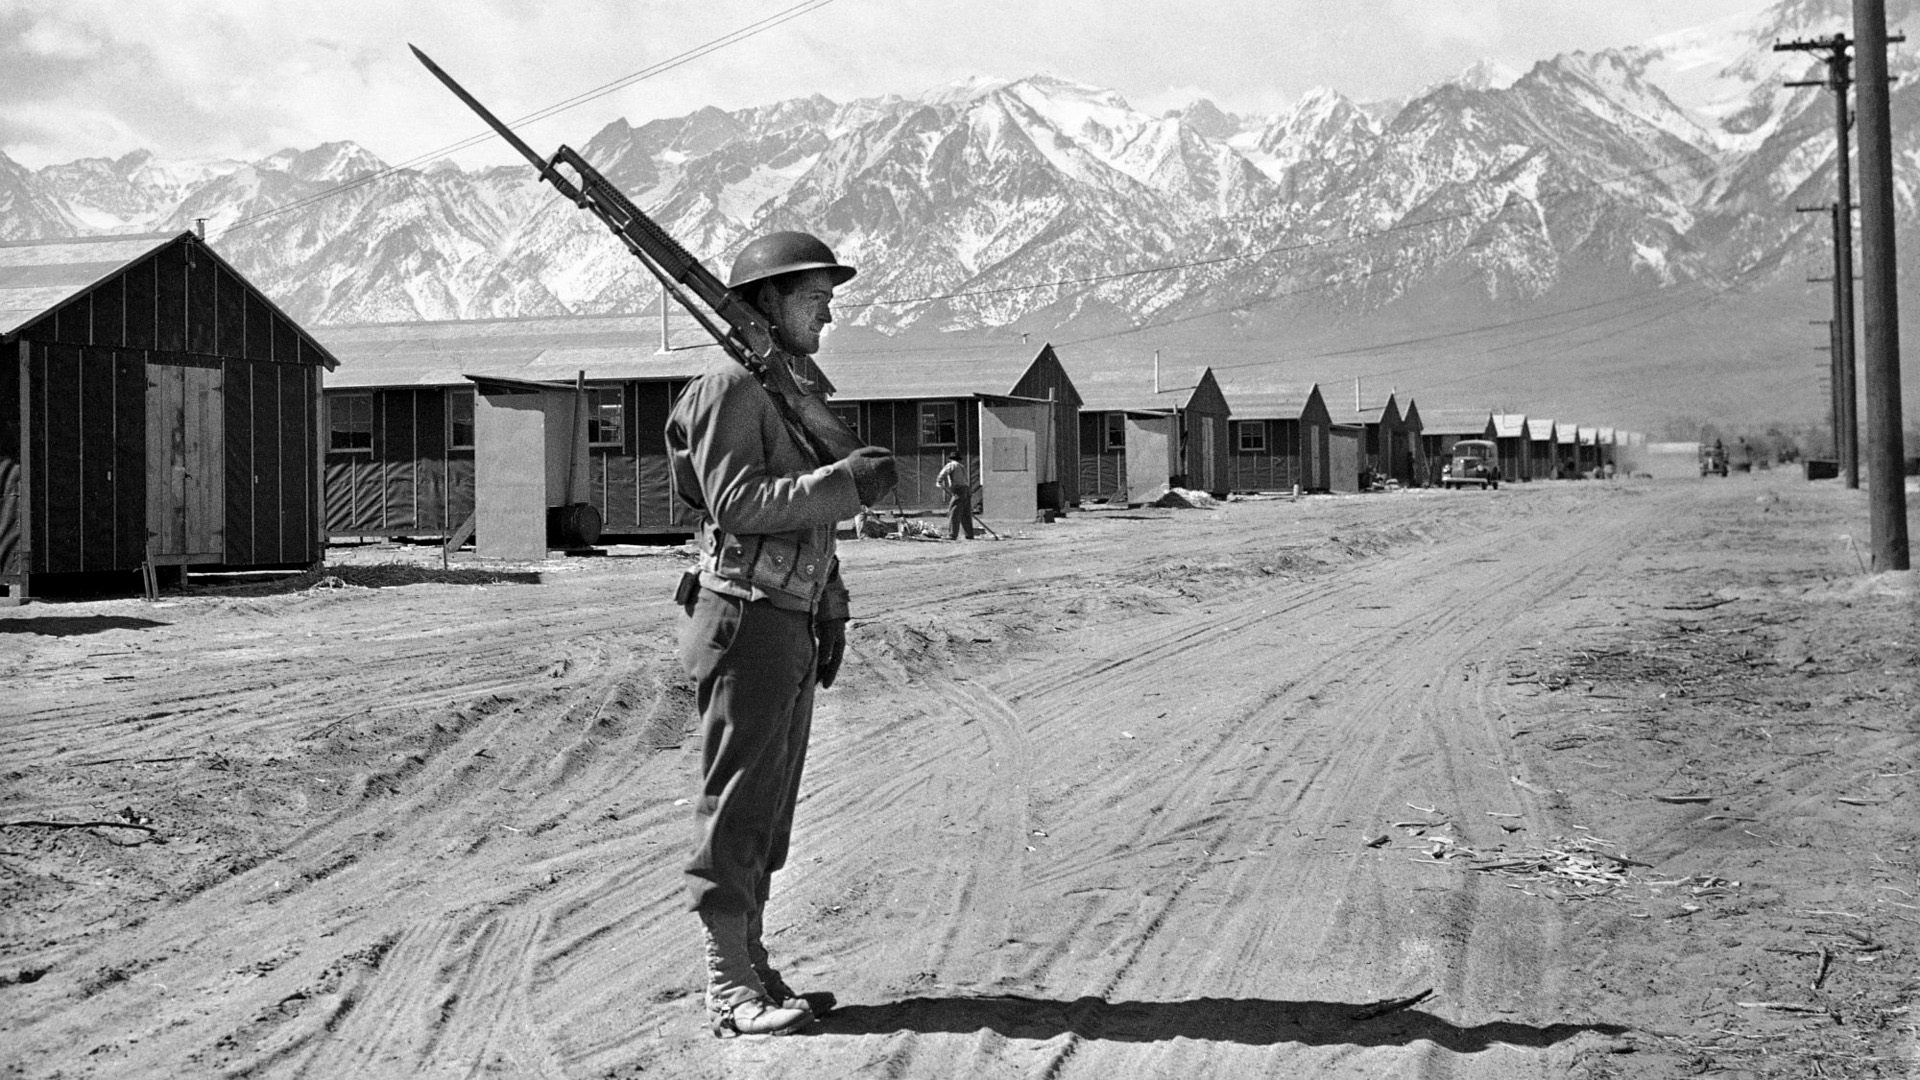  A U.S. soldier stands guard in 1943 at the internment camp for Japanese Americans located at Manzanar, California. 